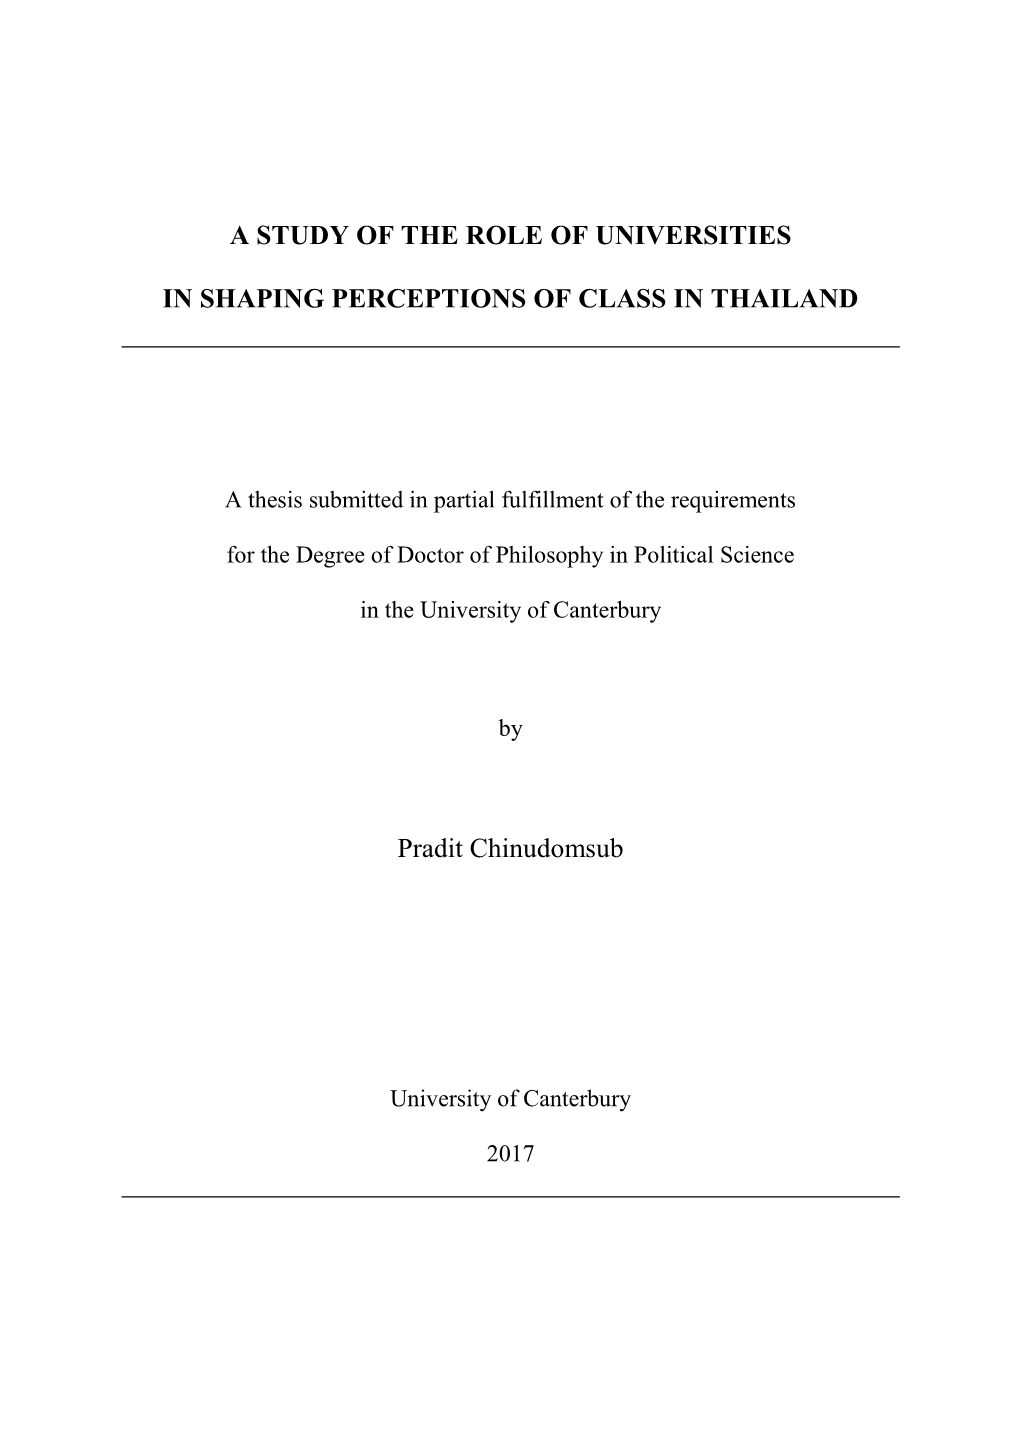 A STUDY of the ROLE of UNIVERSITIES in SHAPING PERCEPTIONS of CLASS in THAILAND Pradit Chinudomsub